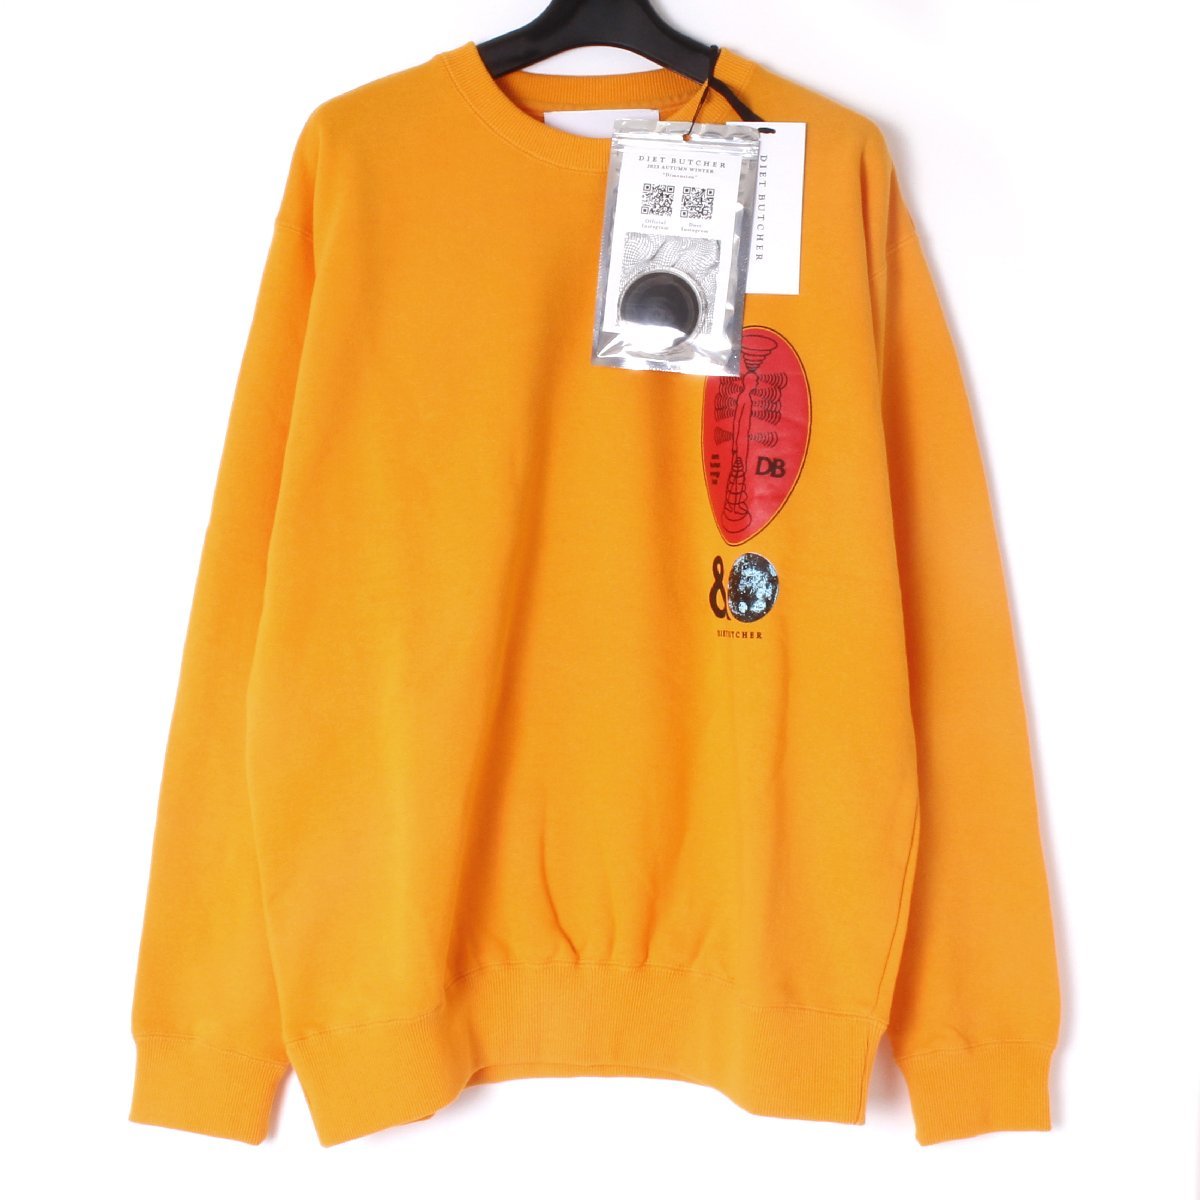 23AW【タグ付き・新品・定価18,700円】DIET BUTCHER Sweat shirt with NEW YOAKE POST size2 DB82387004 ダイエットブッチャー スウェット_画像4